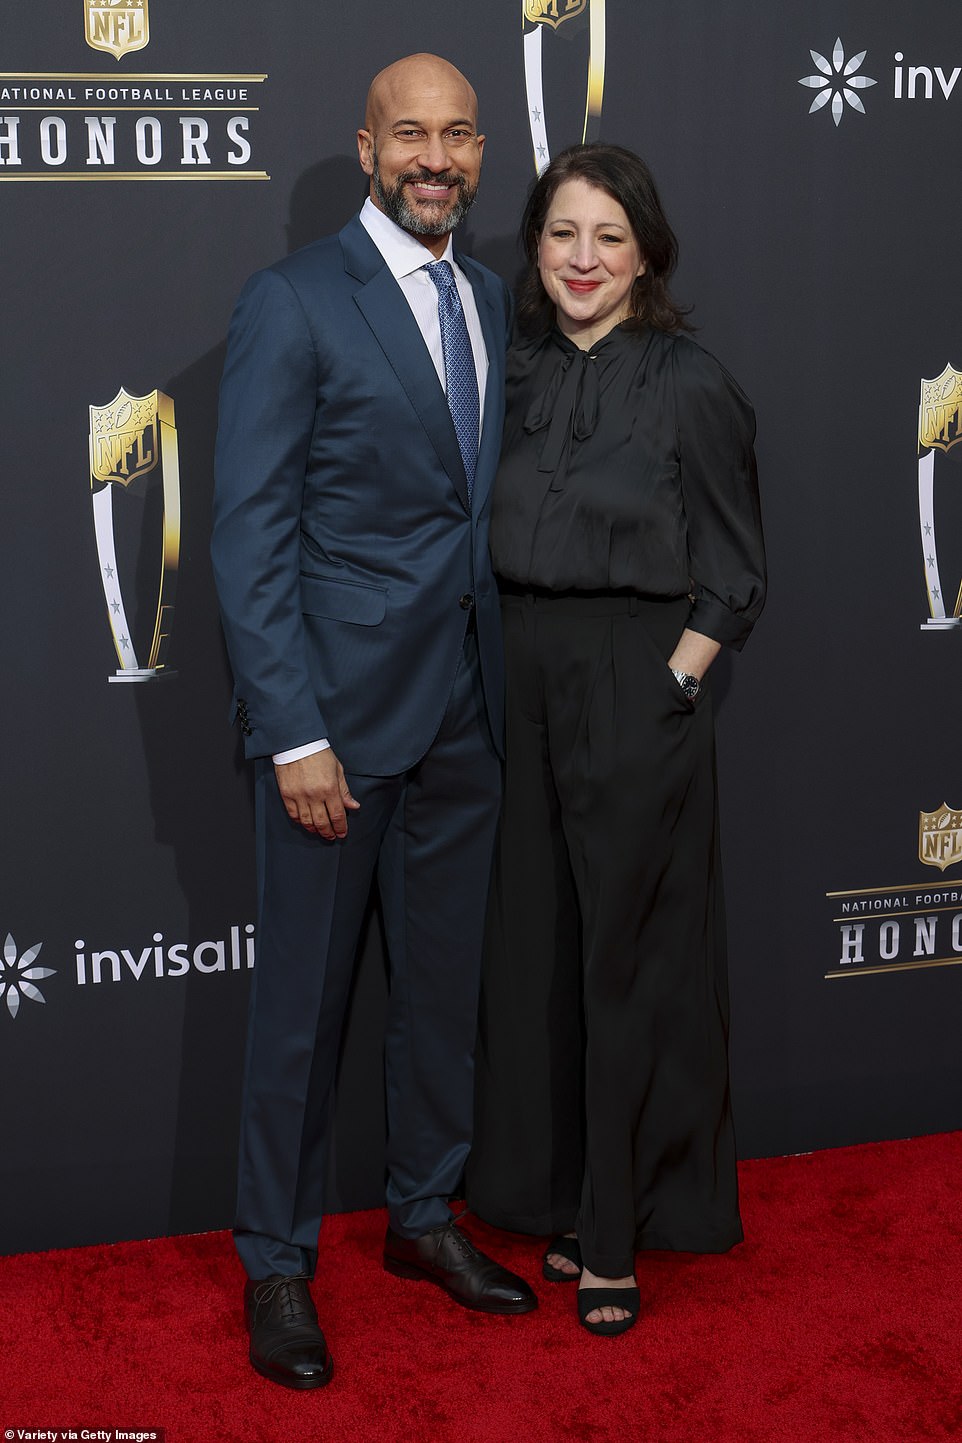 Keegan-Michael Key and his wife Elle Key looked in love at the special event